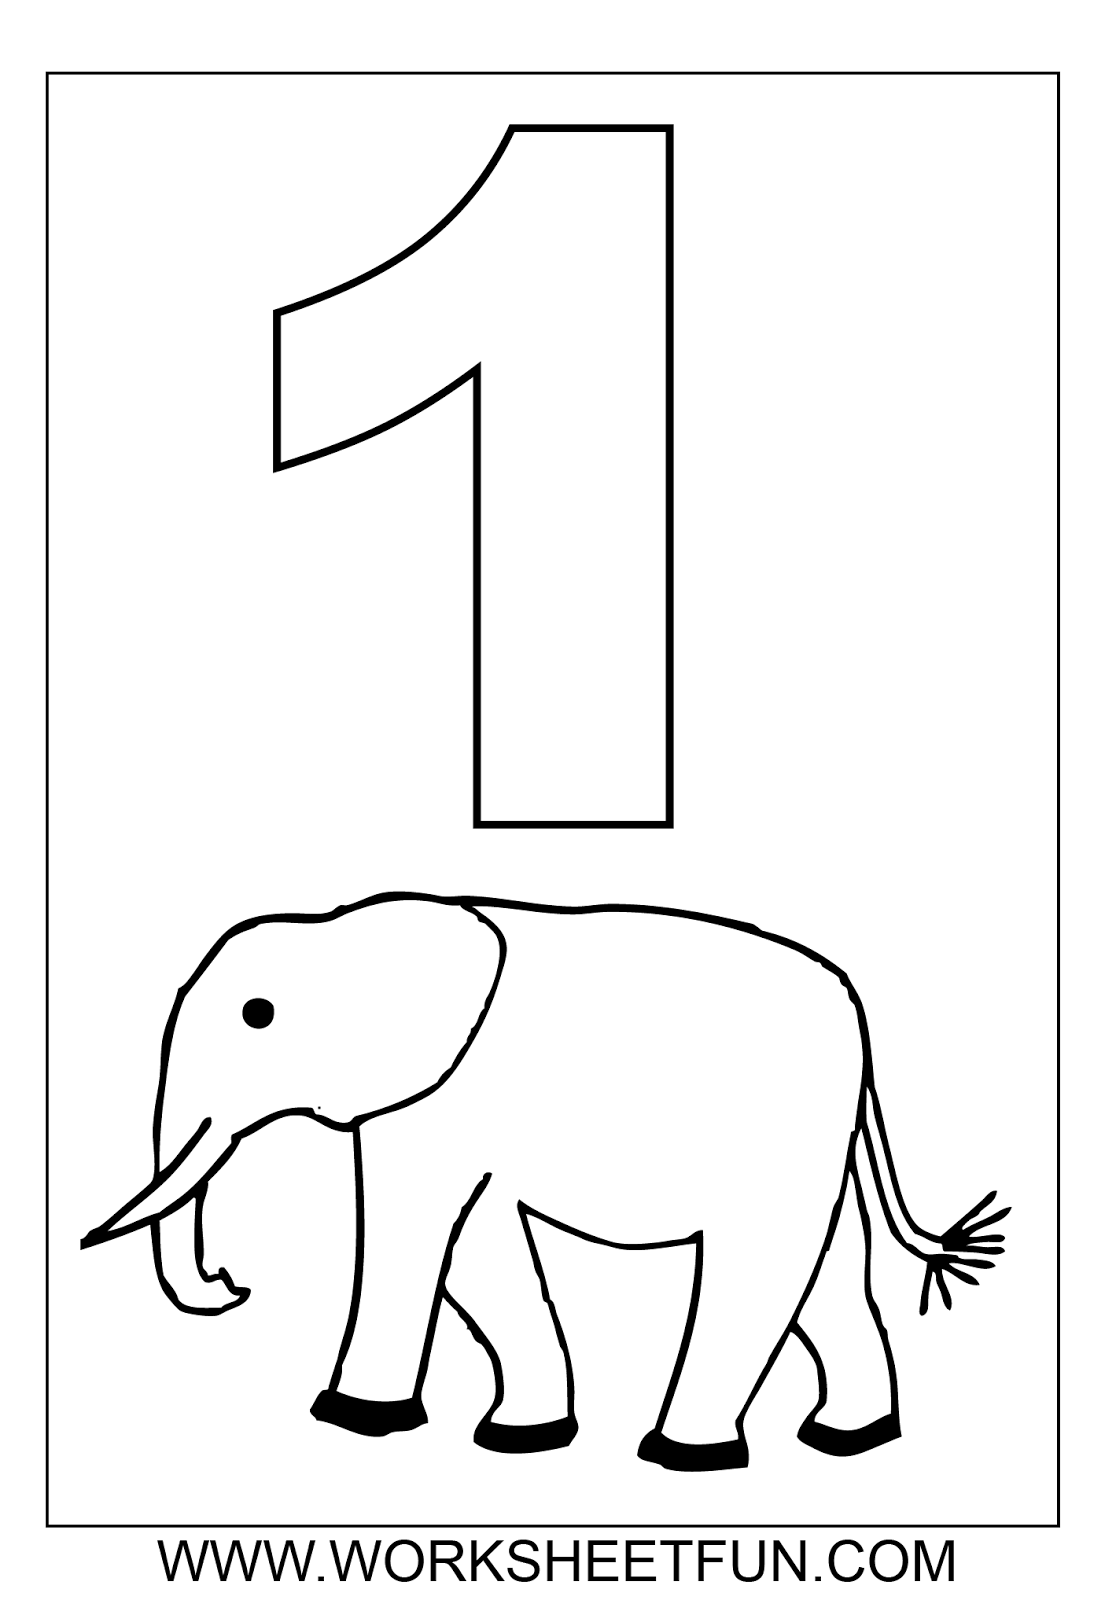 Number 1 Coloring Page Image